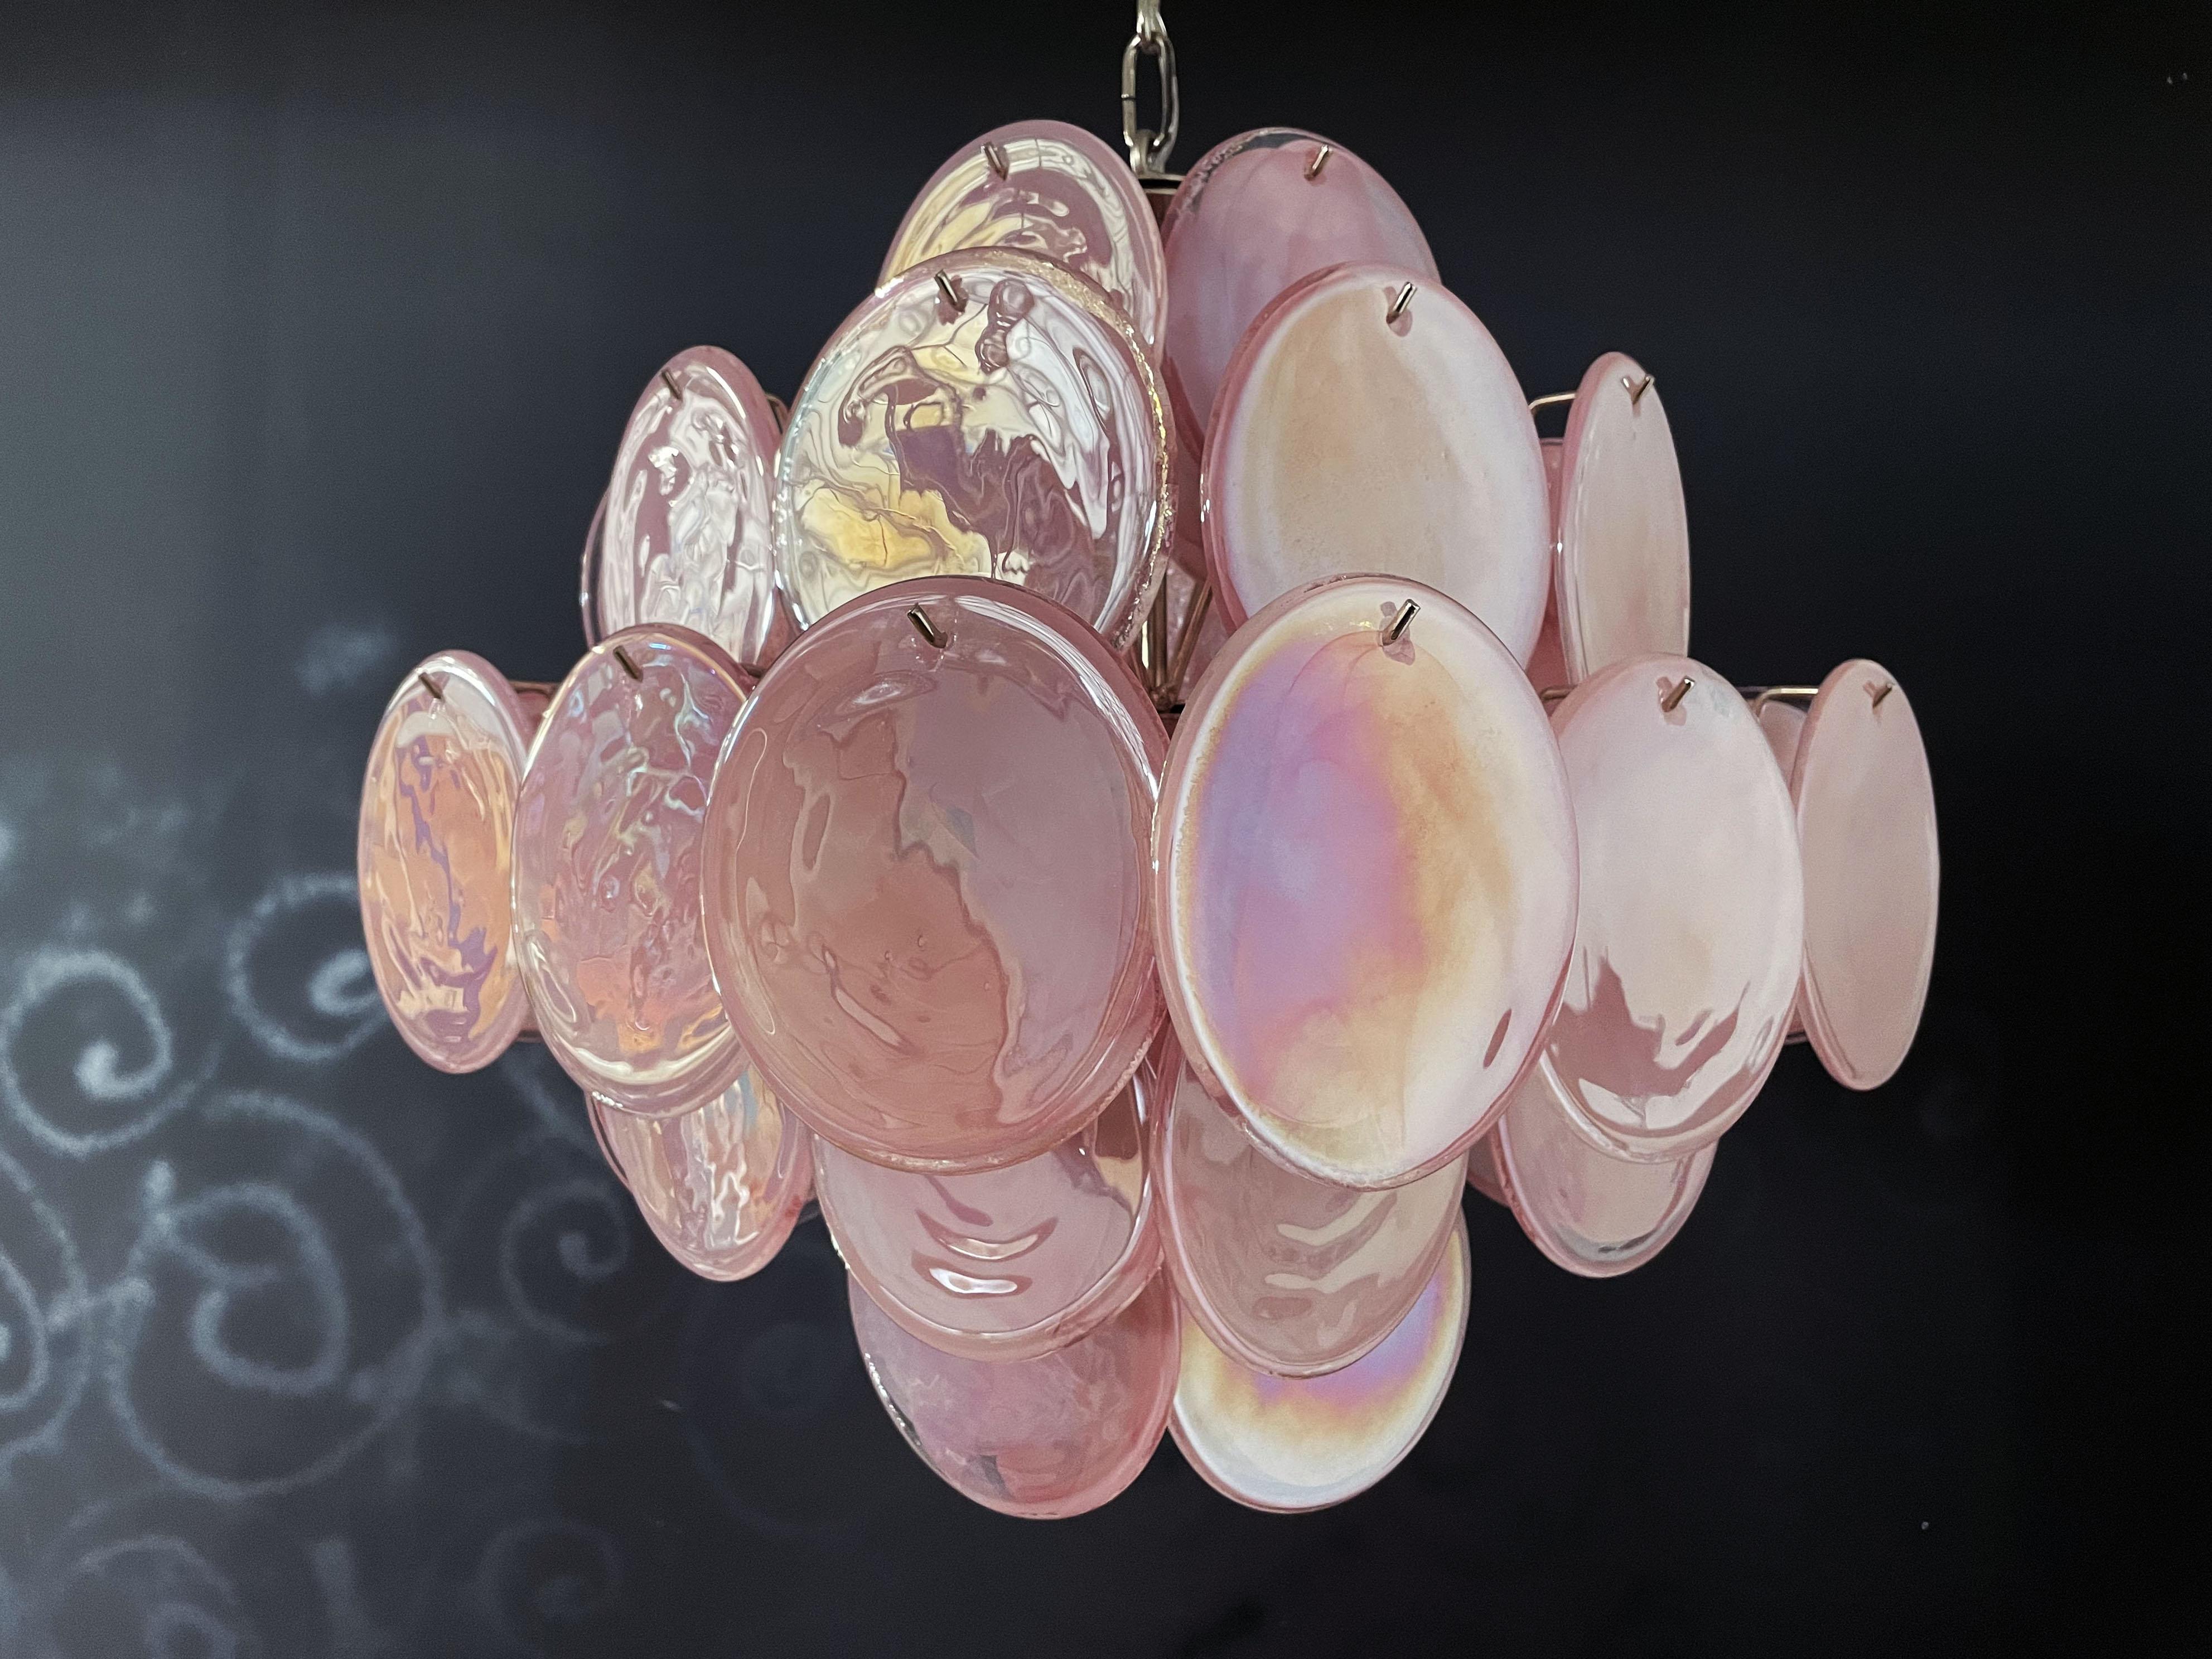 Vintage Italian Murano chandelier in Vistosi style. The chandelier has 36 fantastic iridescent alabaster pink discs in a nickel metal frame.
Period: late XX century
Dimensions: 44,50 inches (15 cm) height with chain; 19,40 inches (50 cm) height